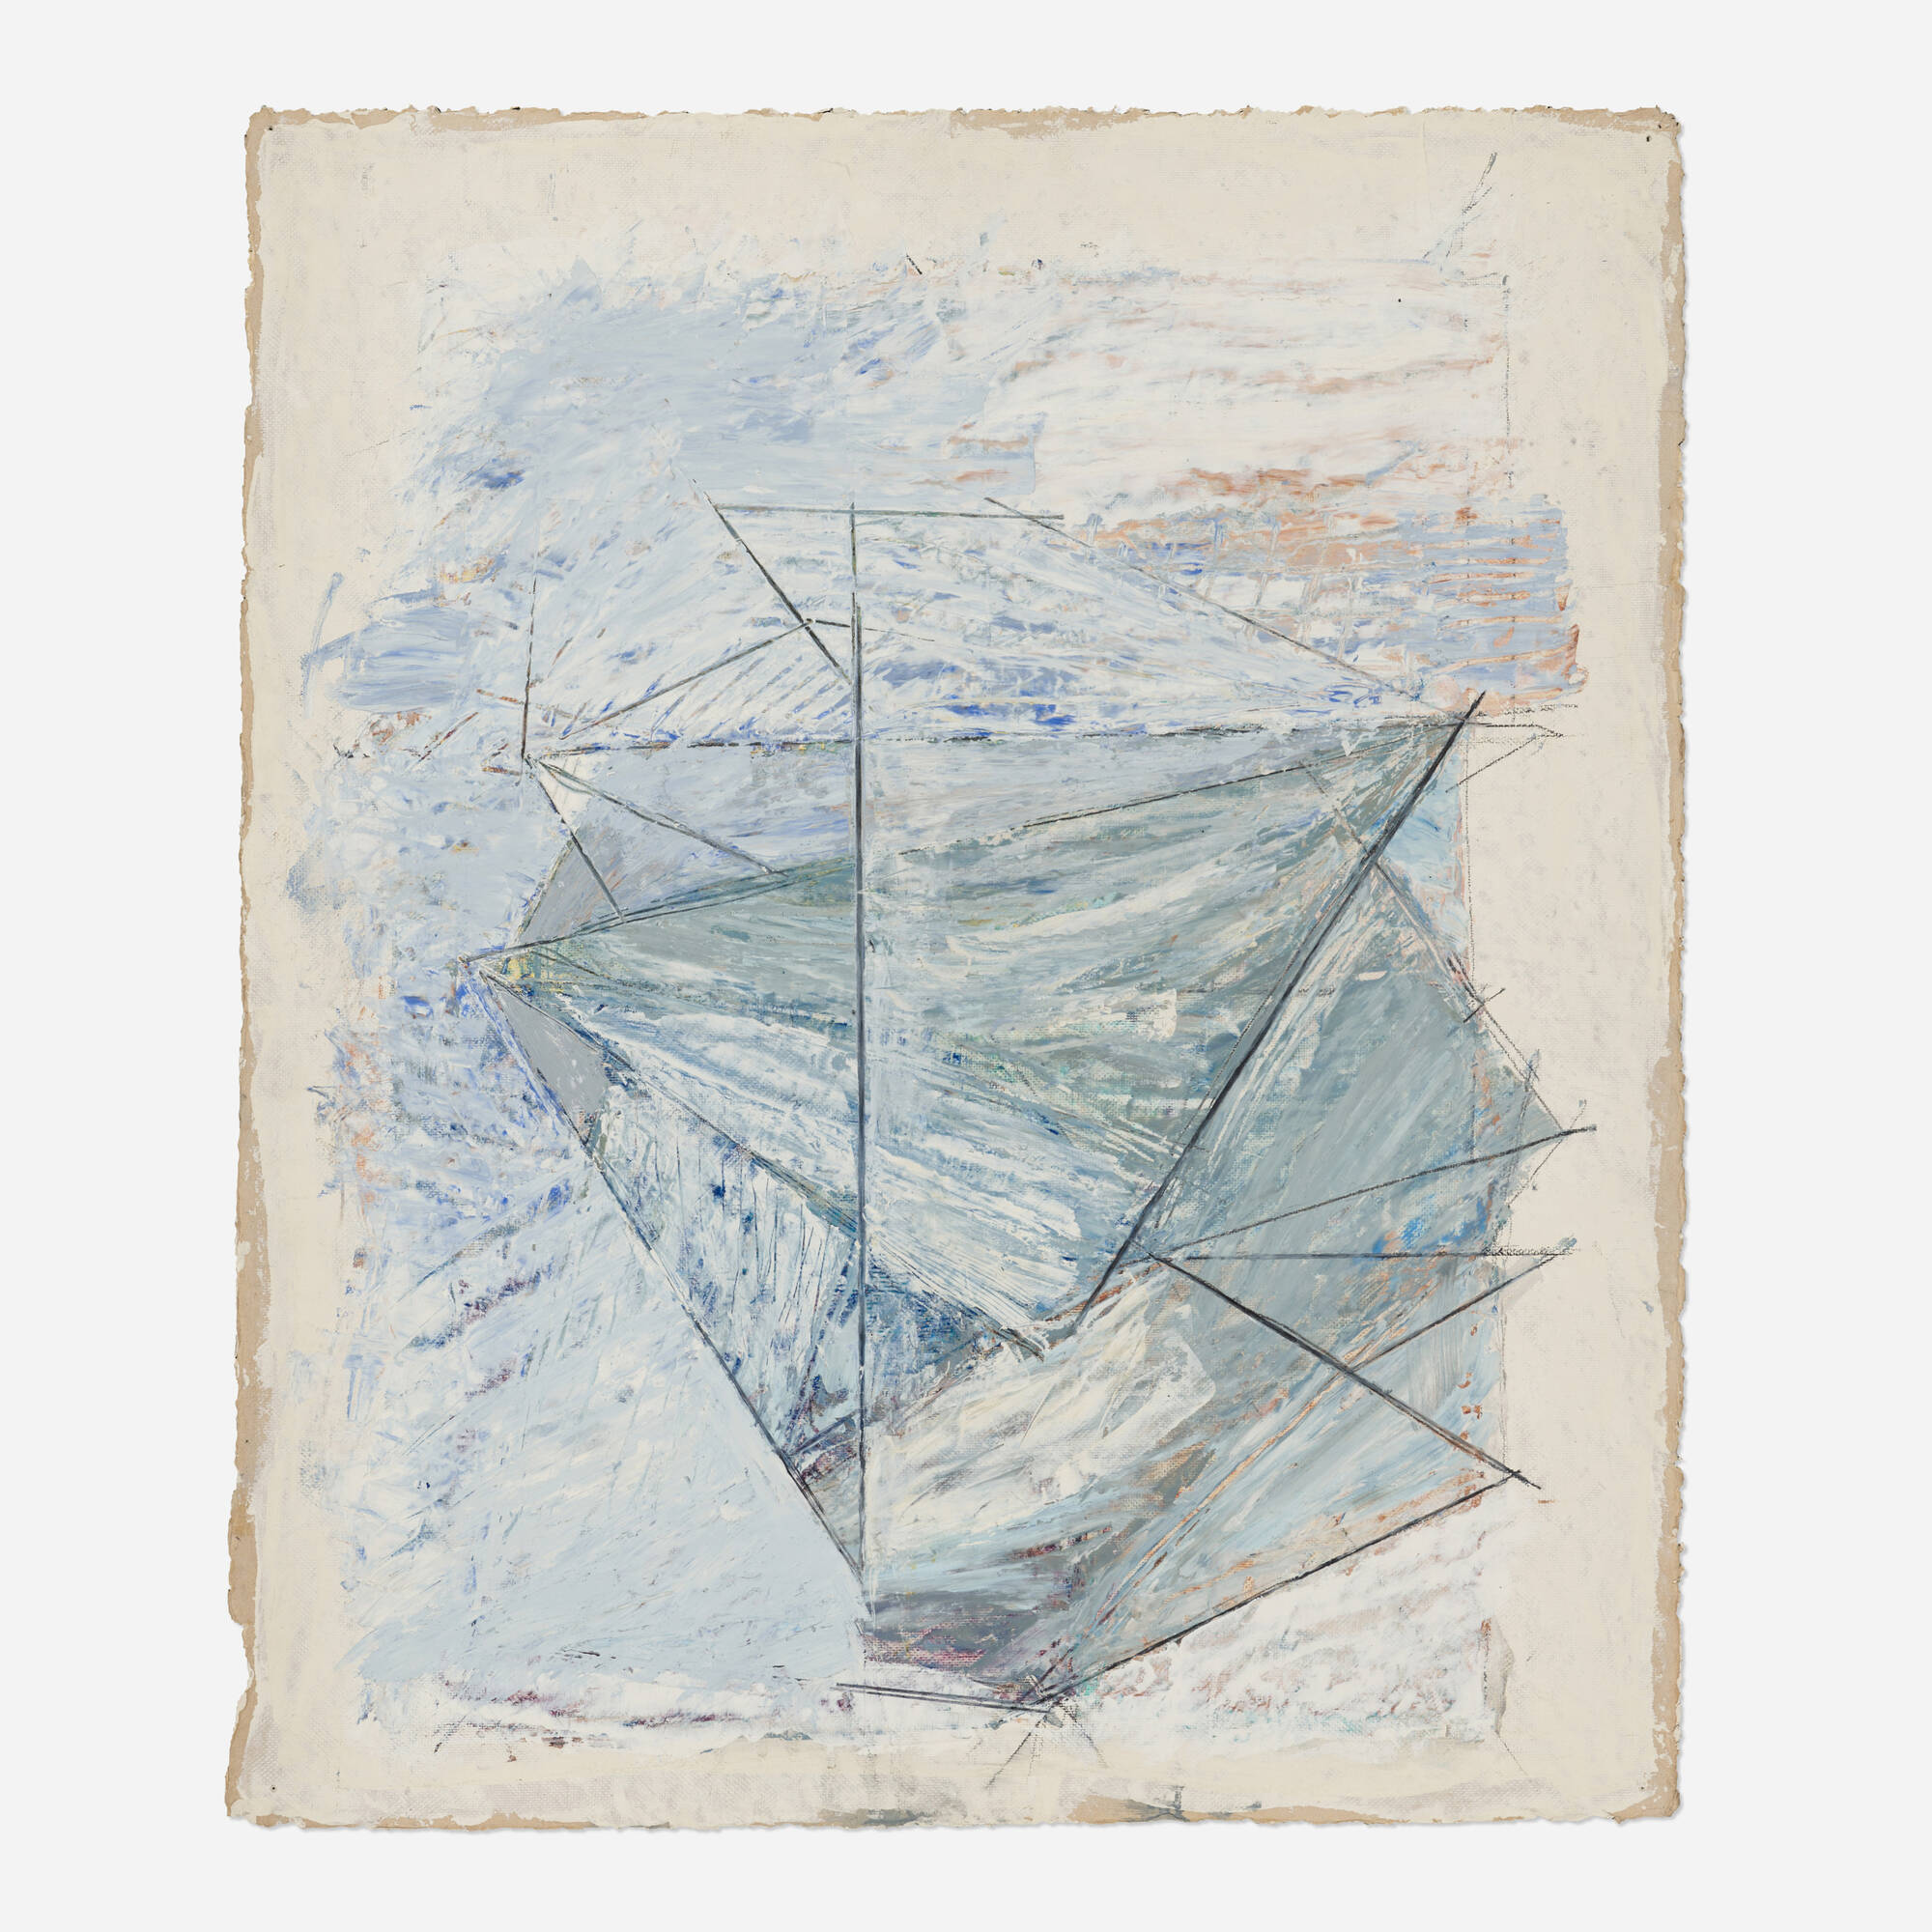 109: LOUISE FISHMAN, Untitled < 20|21 Art: The Chicago Edition, 27 